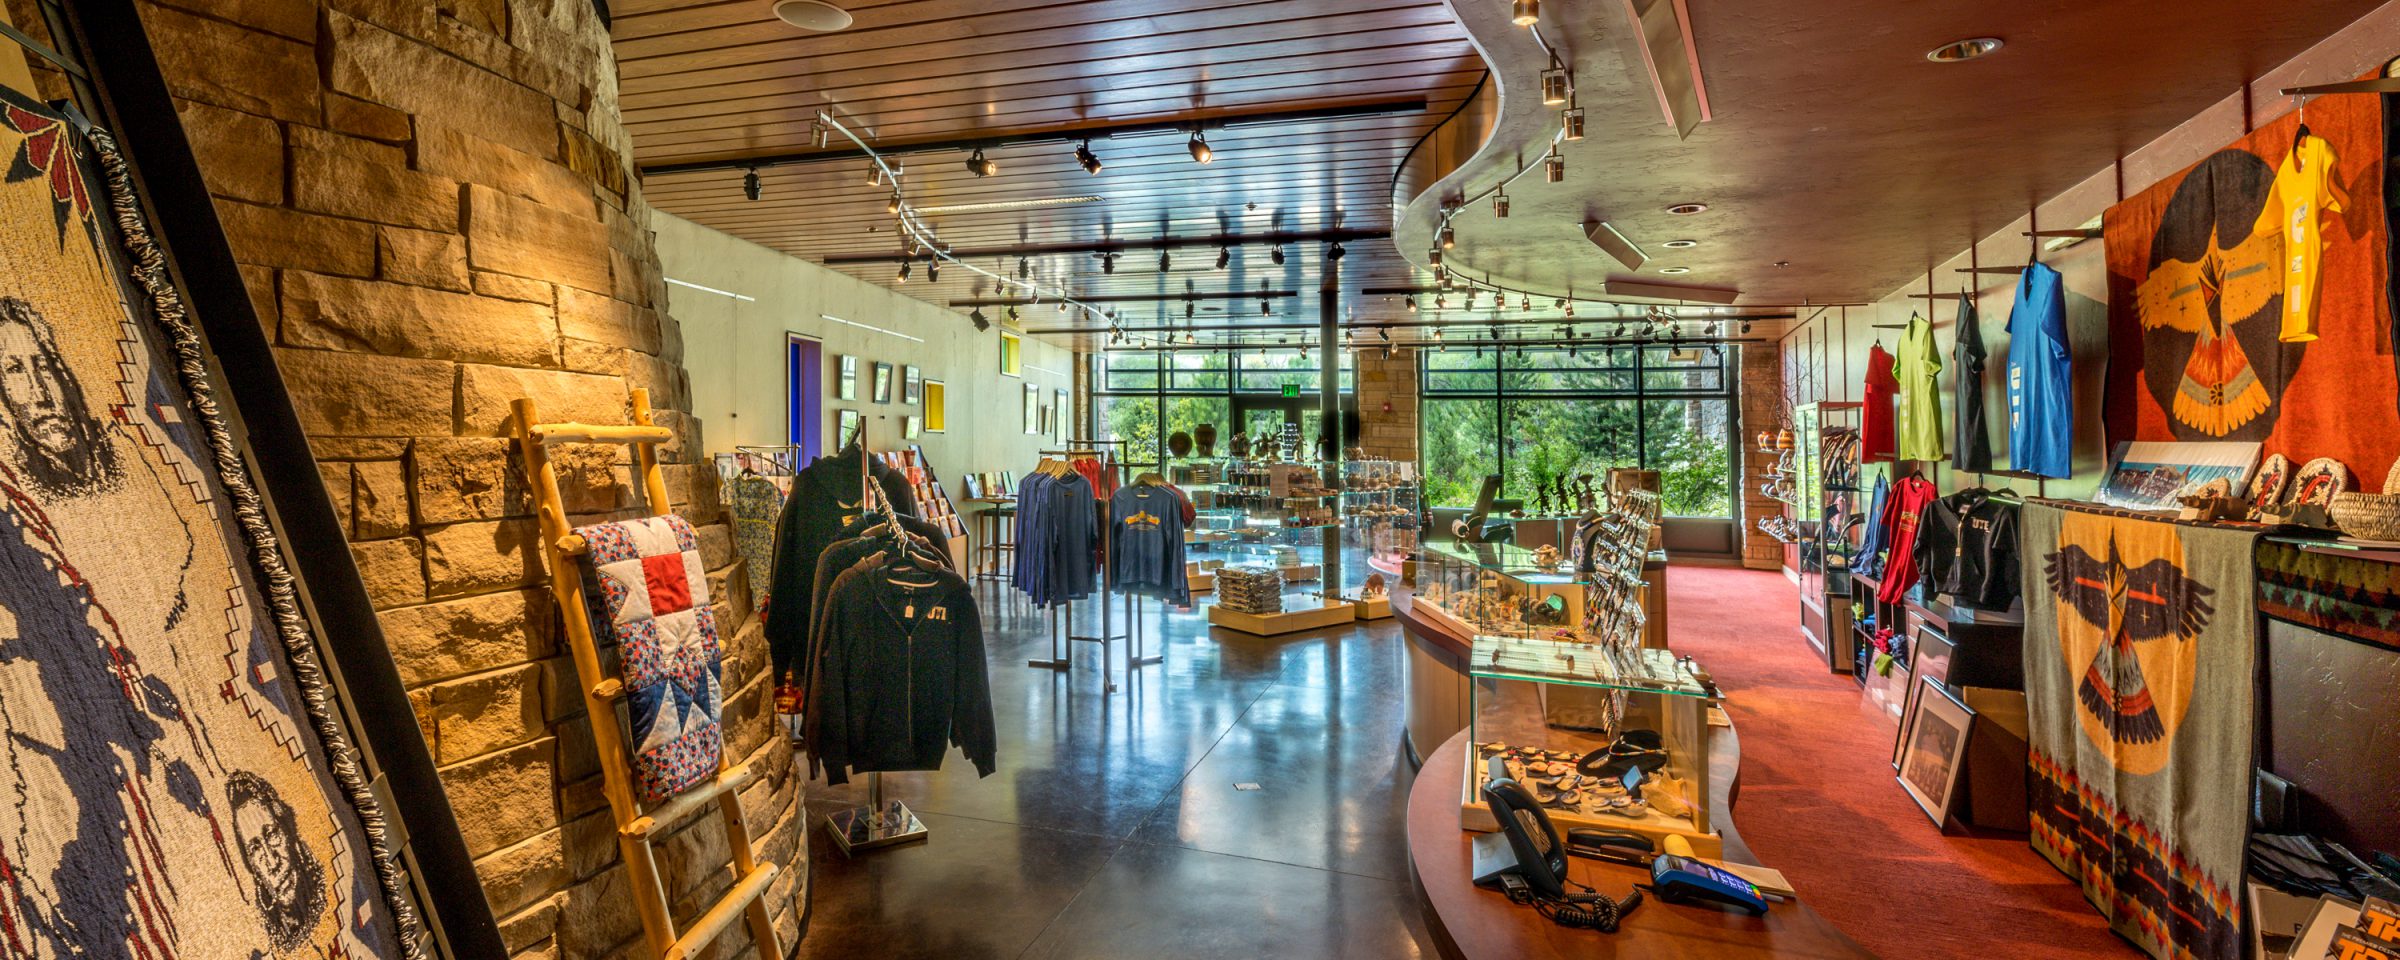 image of museum store